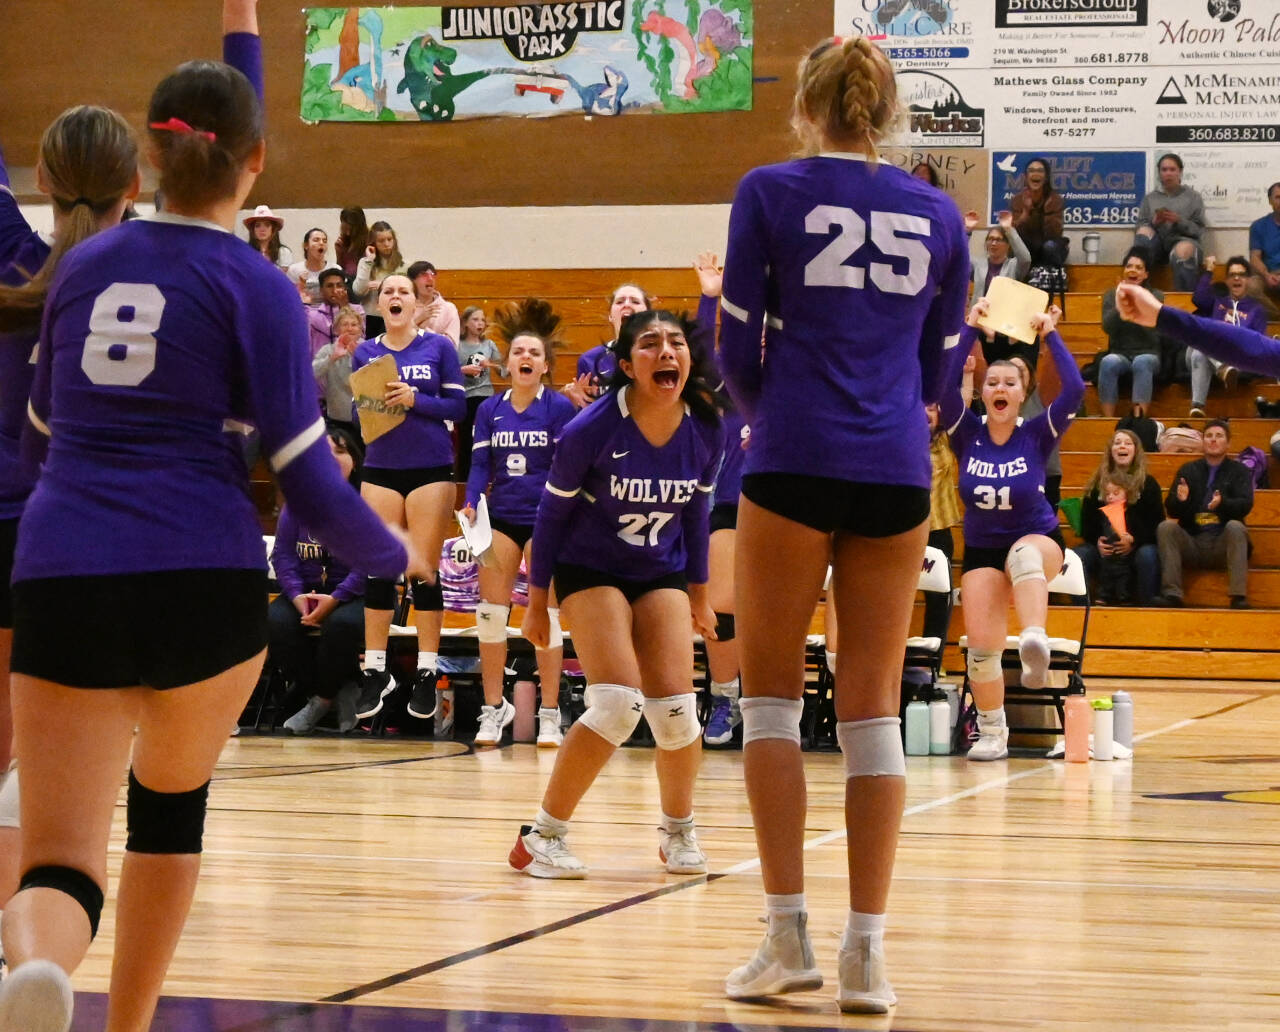 Sequim Gazette photos by Michael Dashiell
Sequim’s Kassi Montero, center, is fired up after the Wolves score a point in the come-from-behind fourth set win to knock off Kingston at home on Oct. 3.